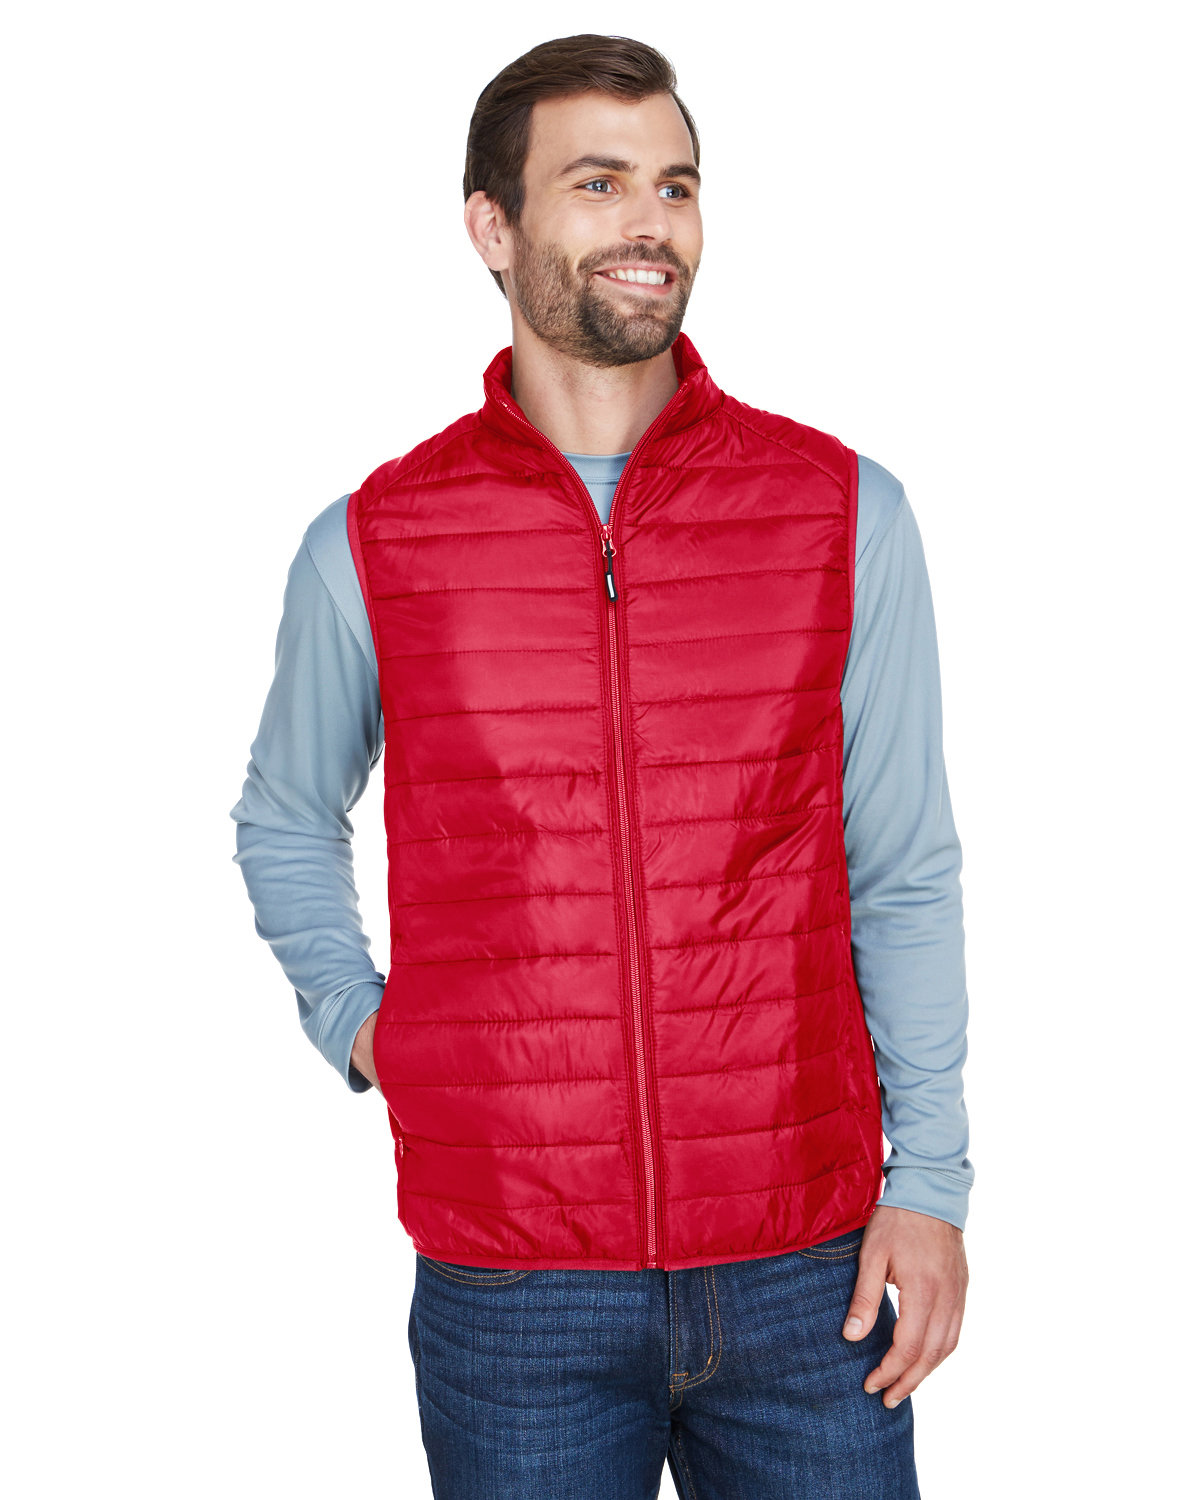 Core 365 Men's Prevail Packable Puffer Vest CLASSIC RED 